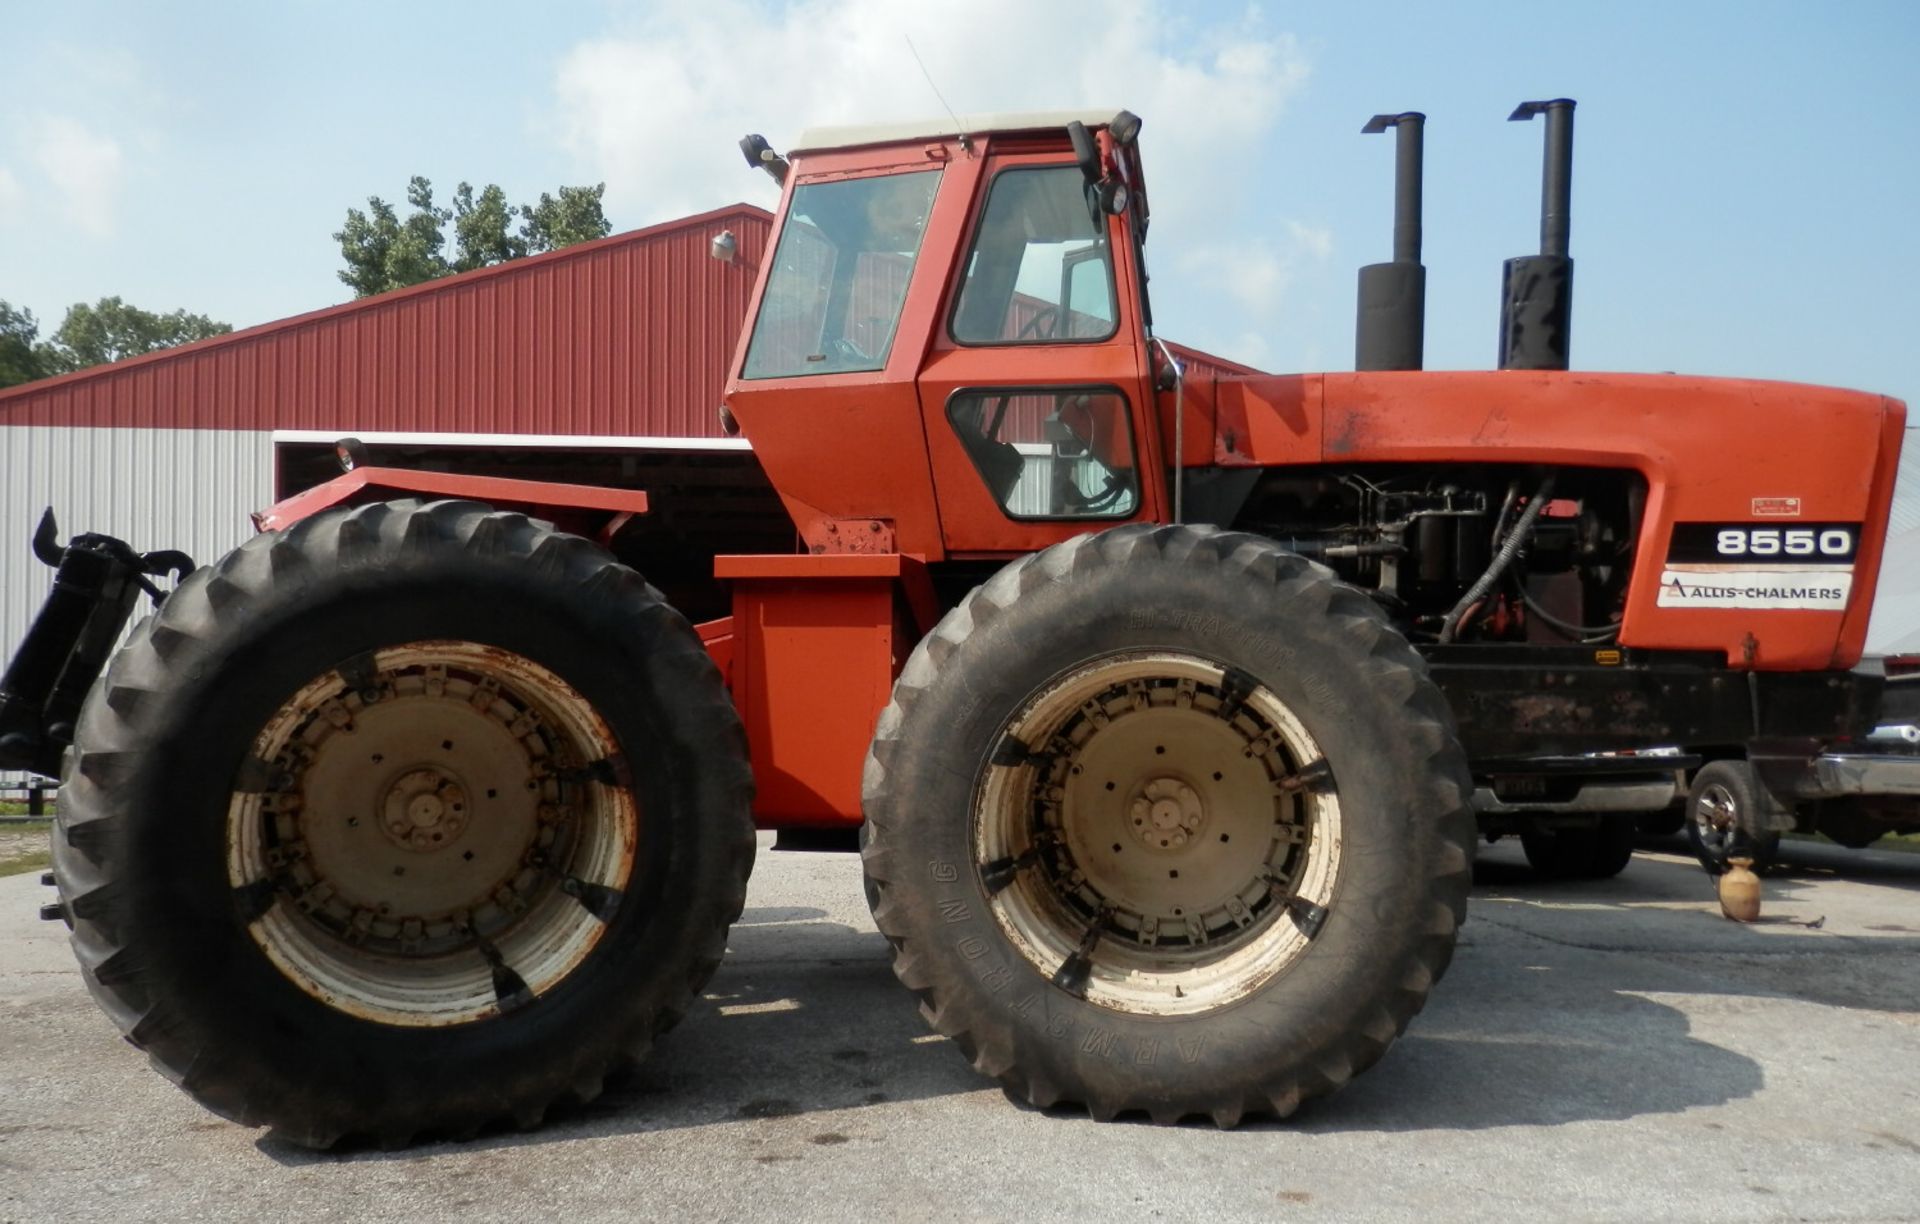 ALLIS CHALMERS 8550 4x4 TRACTOR-SN 1402 - Image 6 of 20